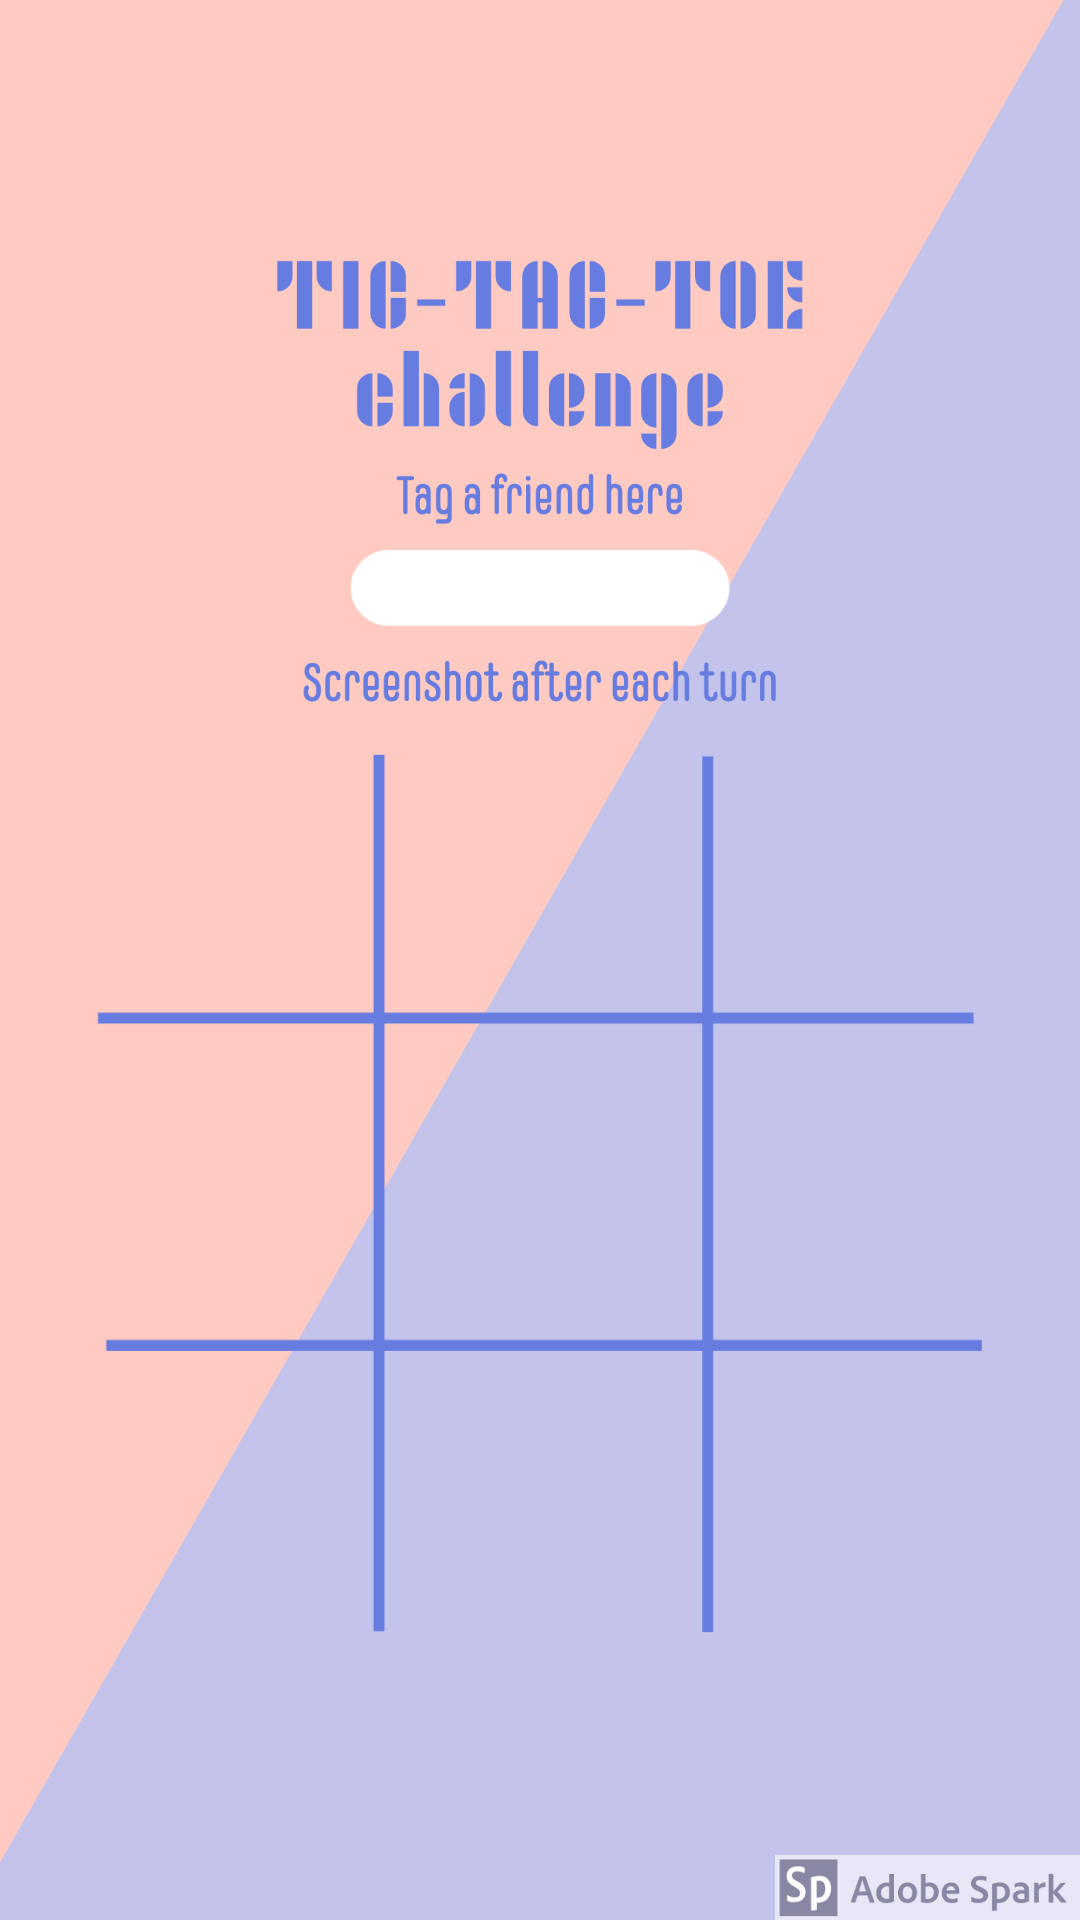 TIC-TAC-TOE challenge TIC-TAC-TOE challenge Screenshot after each turn Tag a friend here